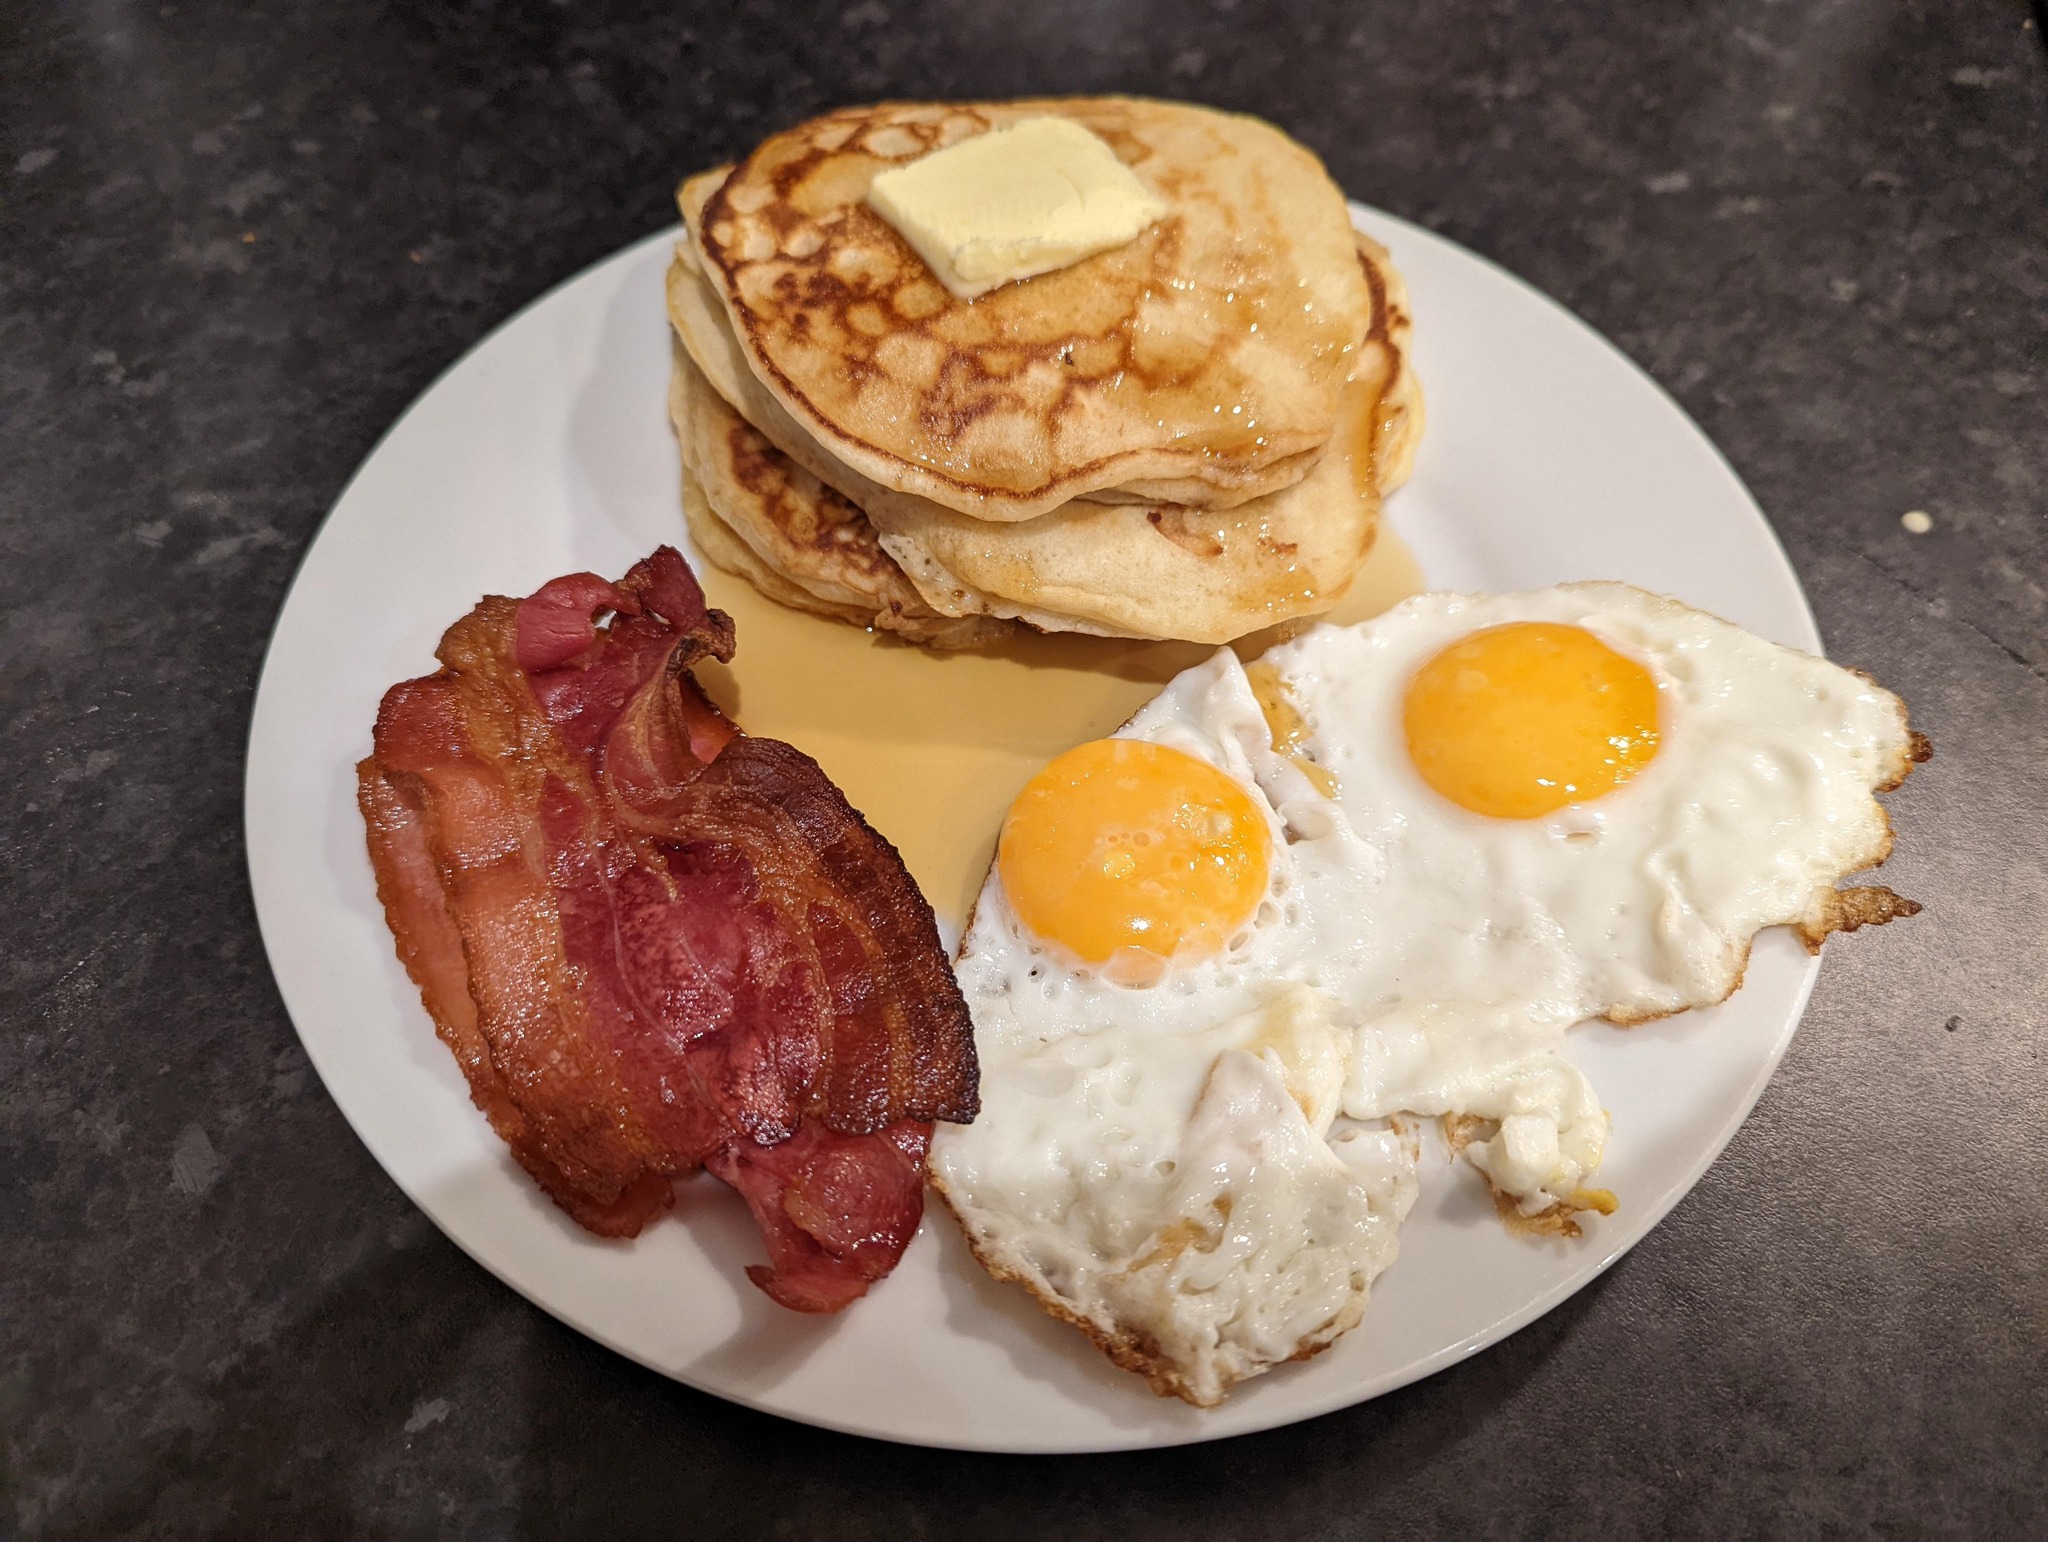 Bacon, eggs and pancakes on a plate